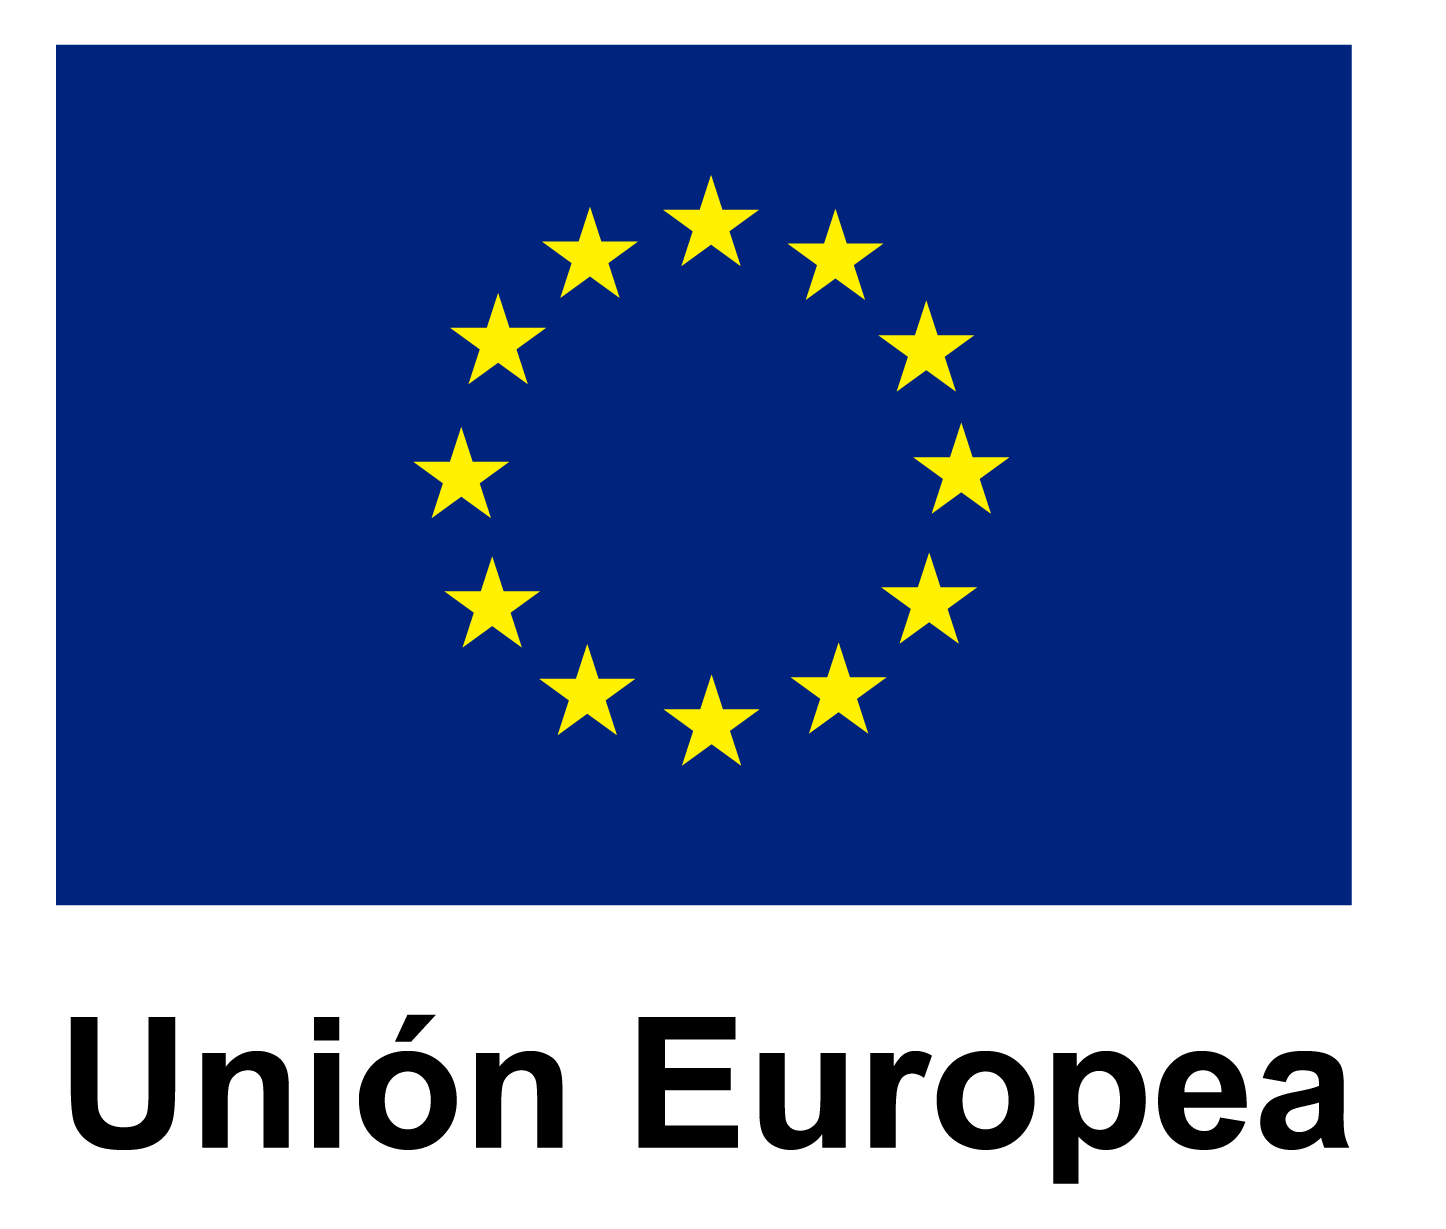 a blue flag with yellow stars and the words union europea underneath